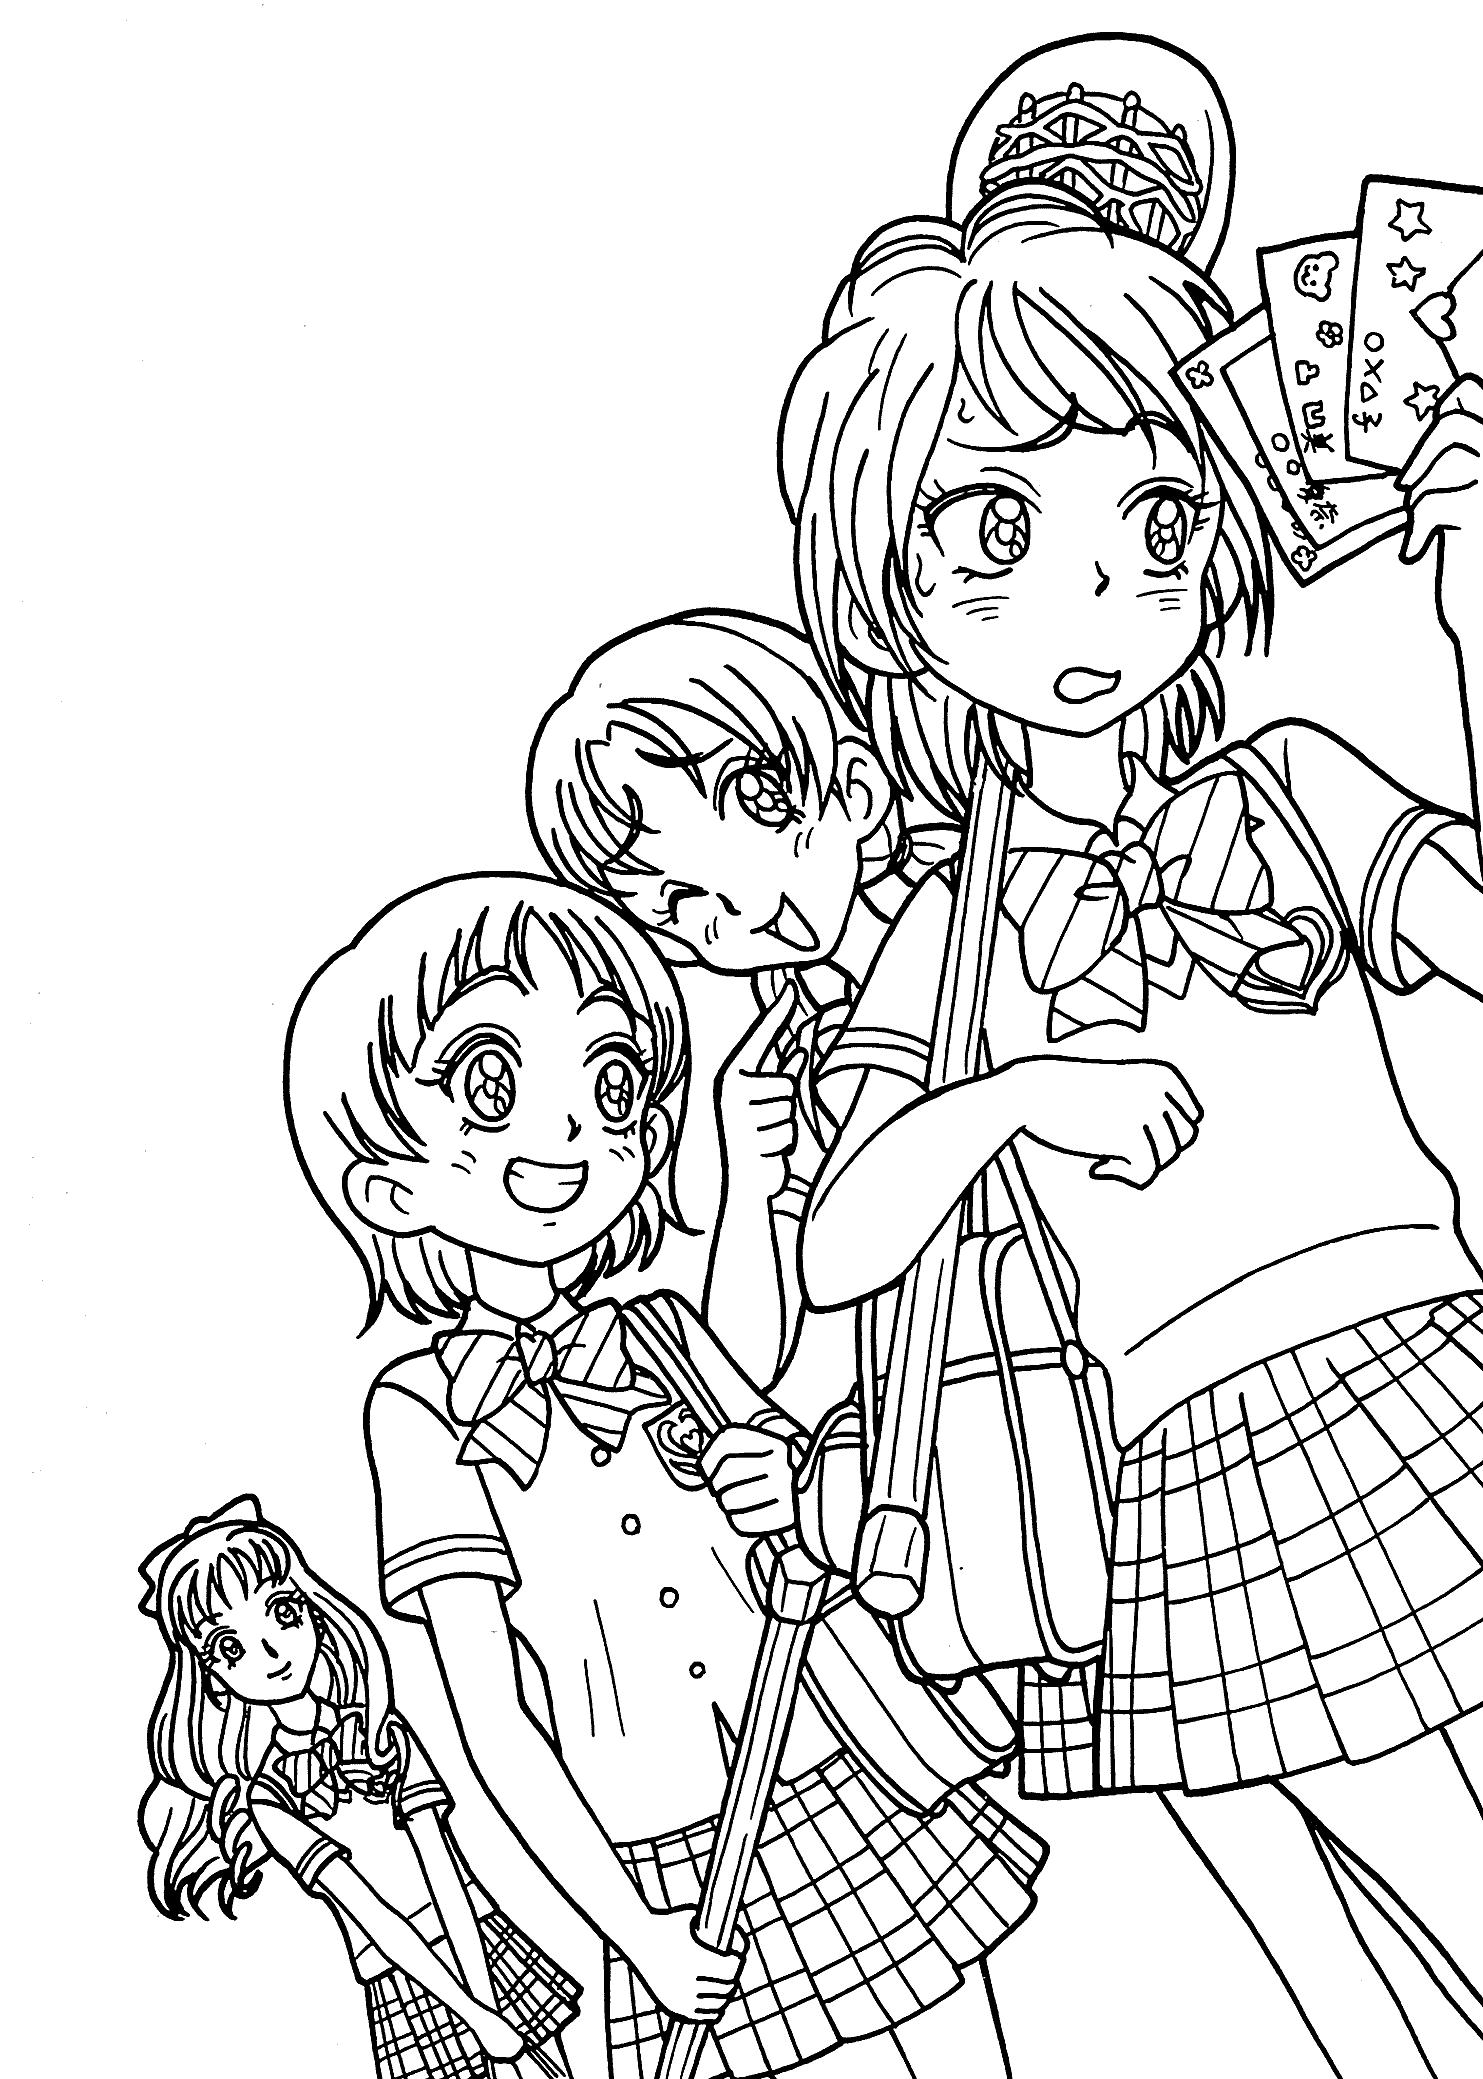 anime coloring page cute anime girl lineart by chifuyu san on deviantart coloring page anime 